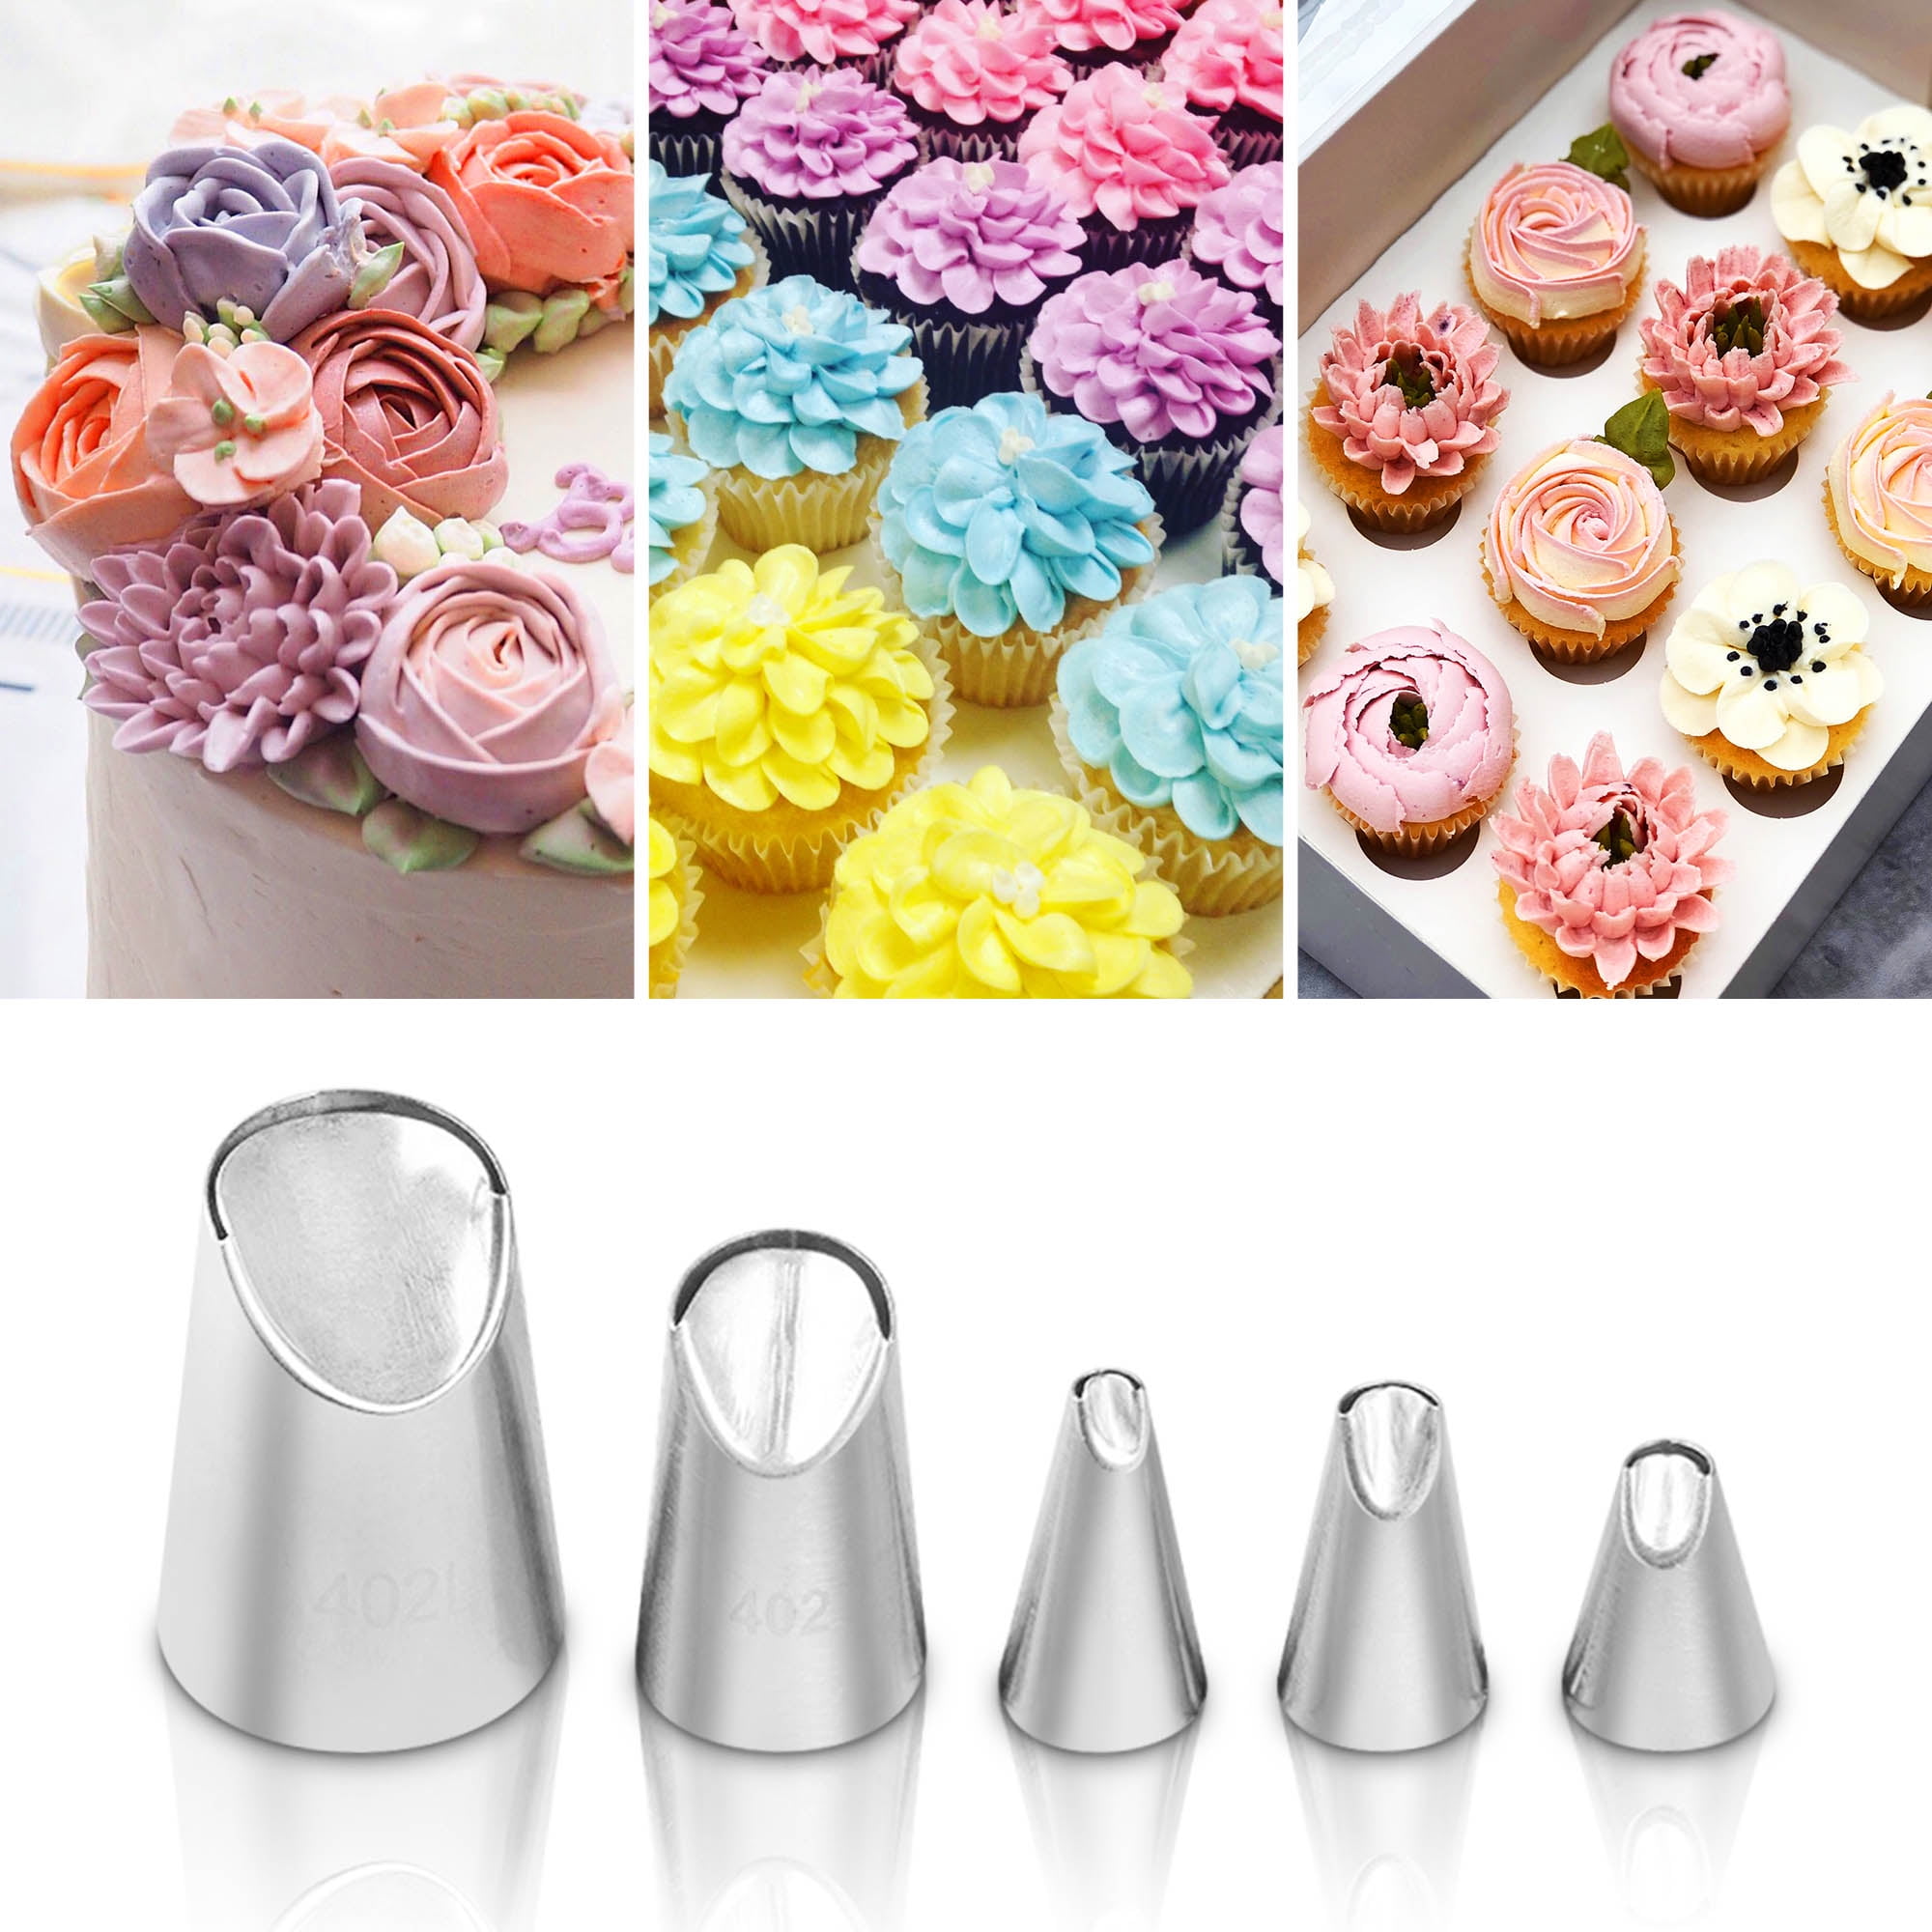 Stainless Steel Icing Piping Nozzle Tool Cake Cupcake Sugarcraft Decorating 